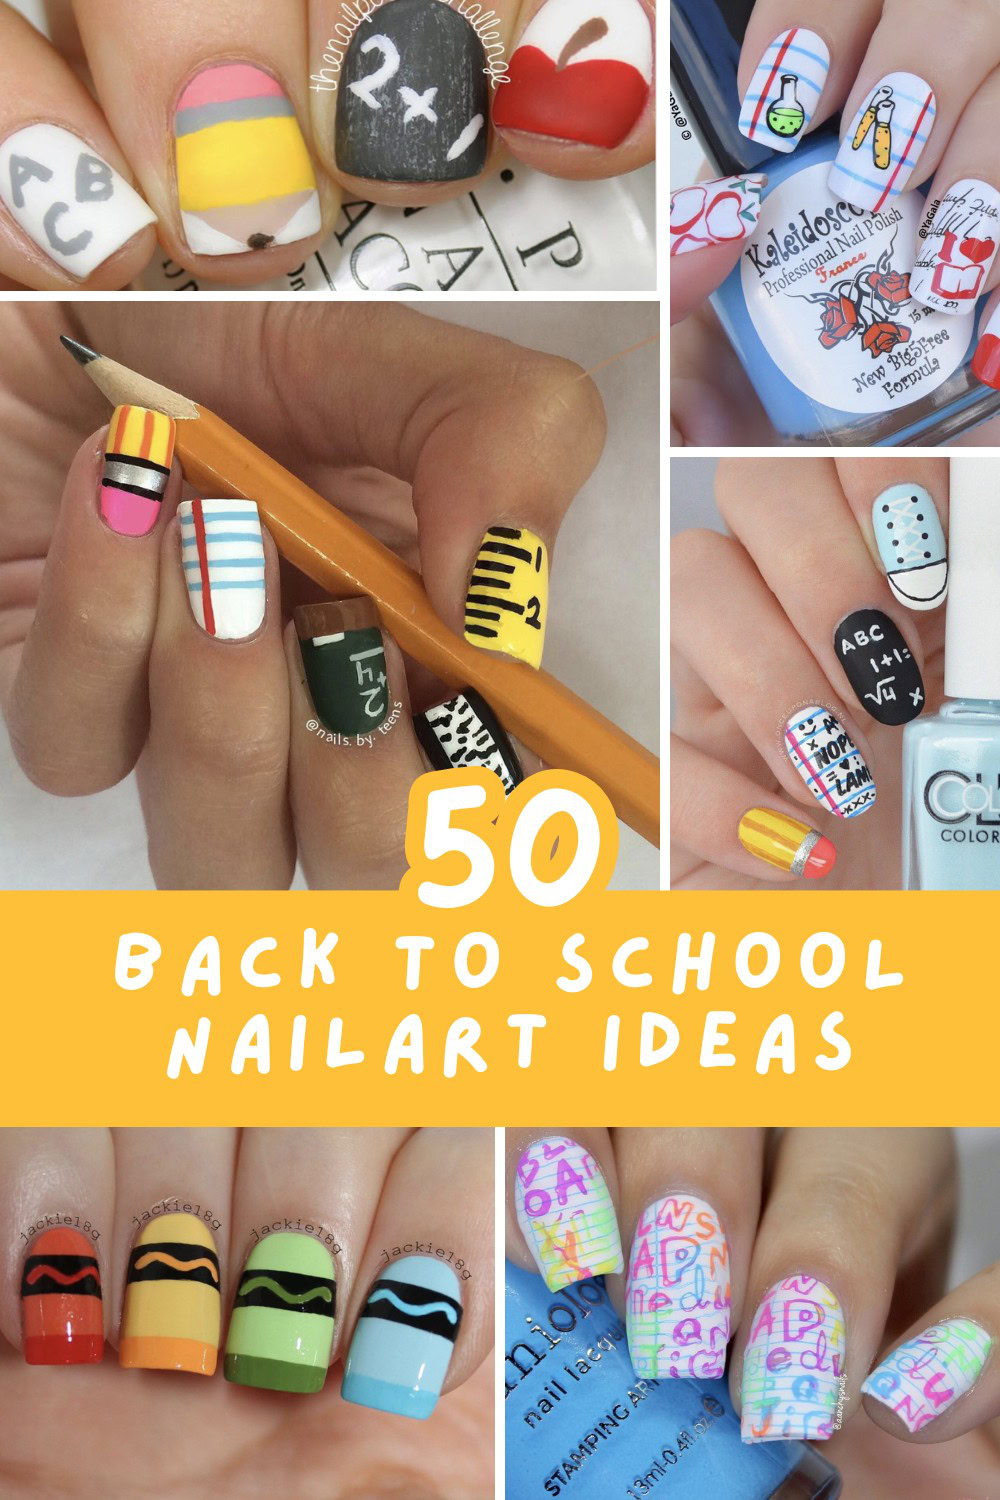 Time to plan your back to school nails! Check out these cute and creative nail ideas that will inspire both teachers and students. 🎨✨ #NailInspiration #SchoolVibes